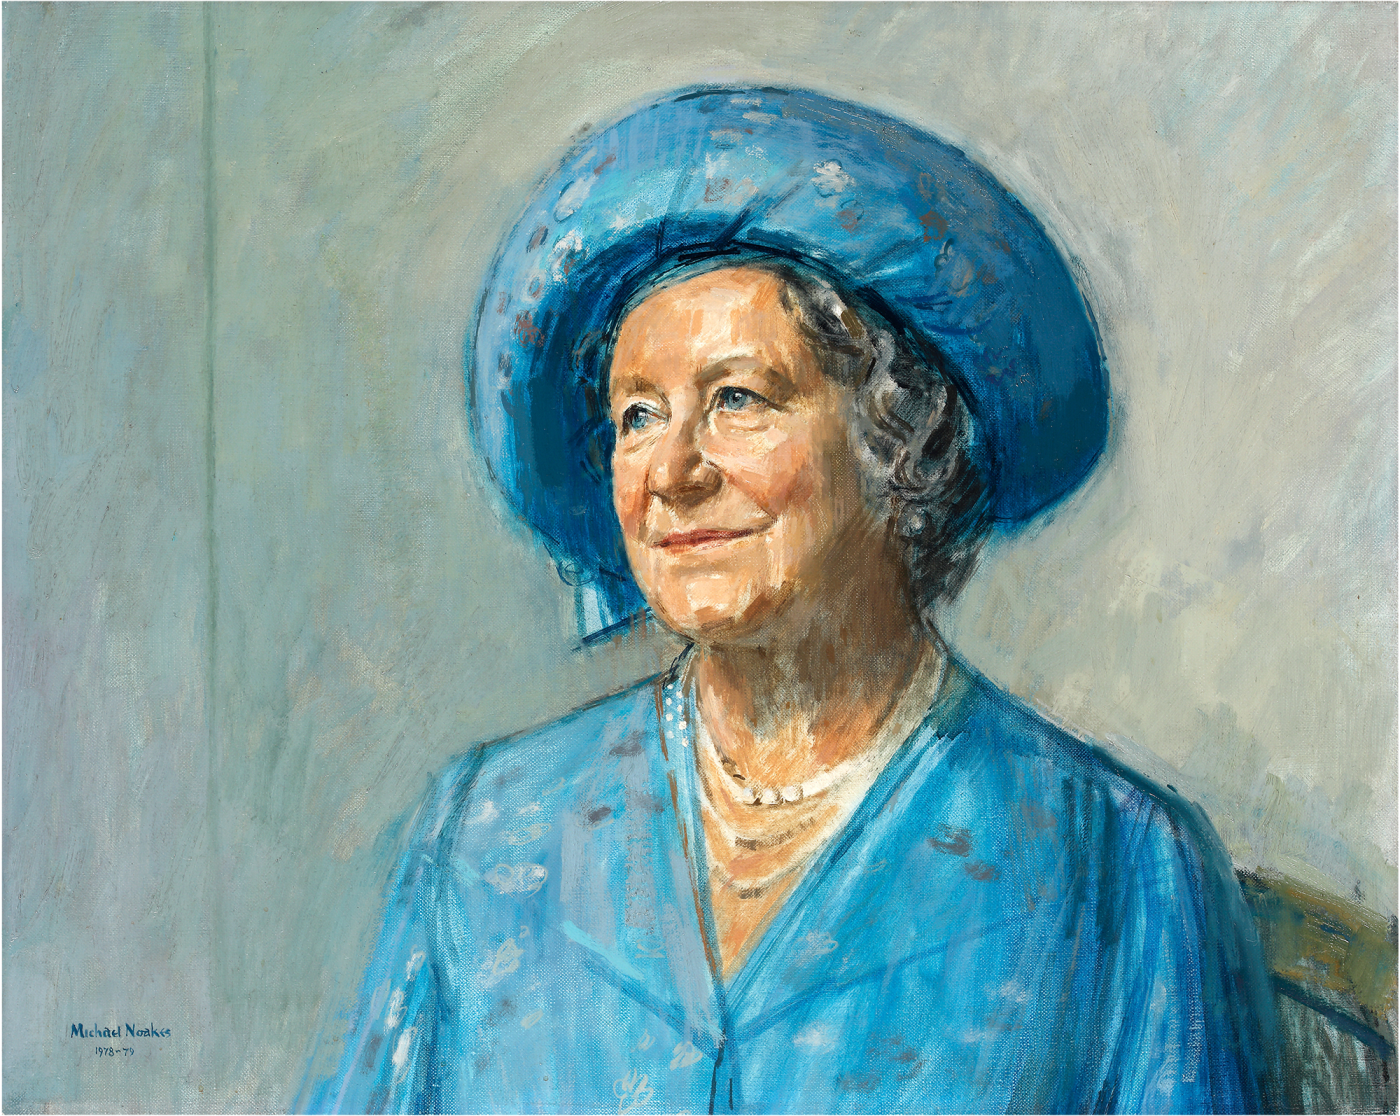 a portrait of The Queen Mother by renowned royal portraitist Michael Noakes